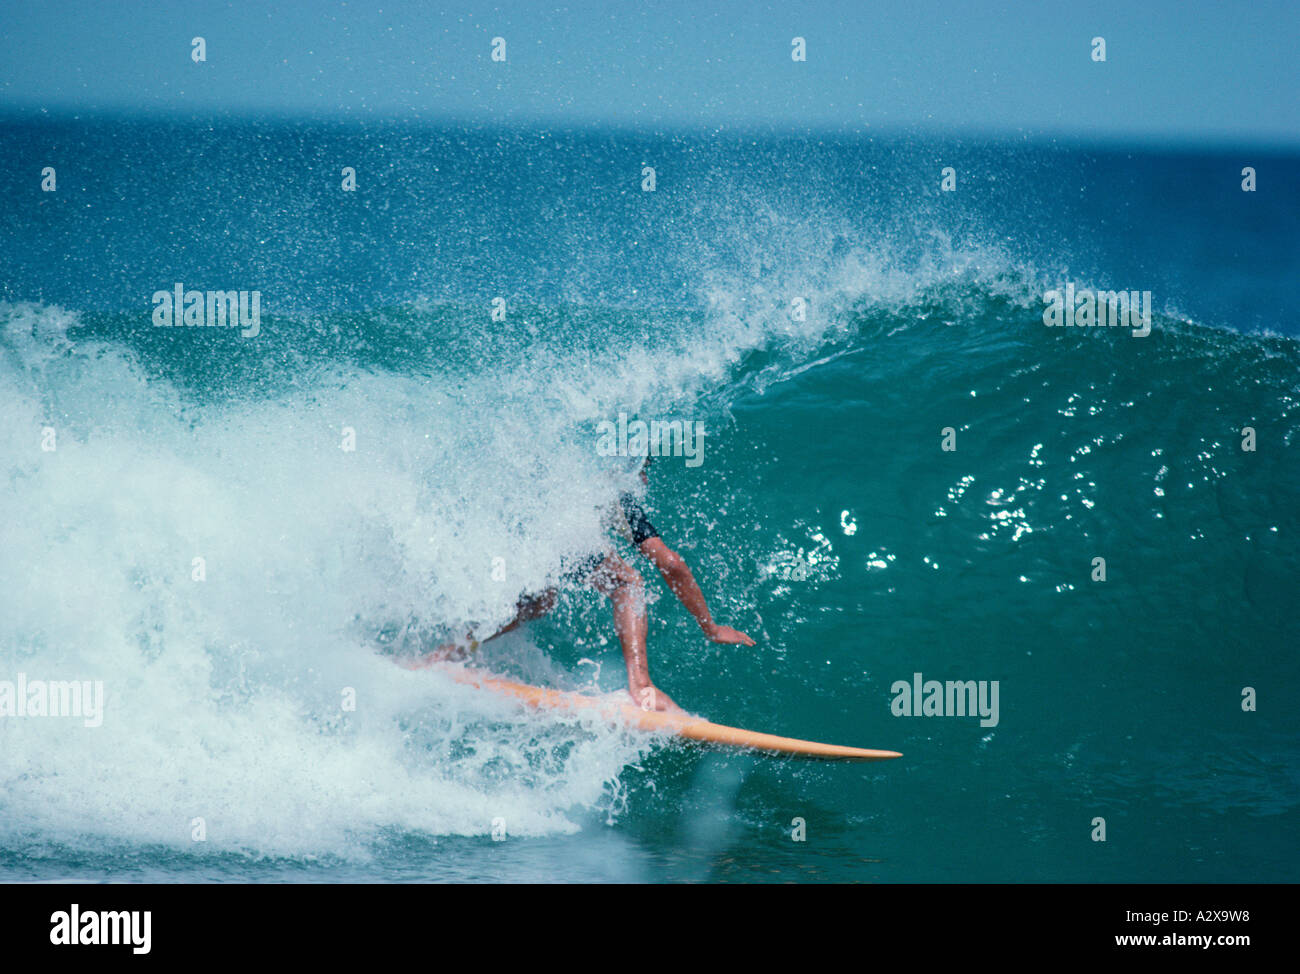 Surfing man in barrel wave. Stock Photo